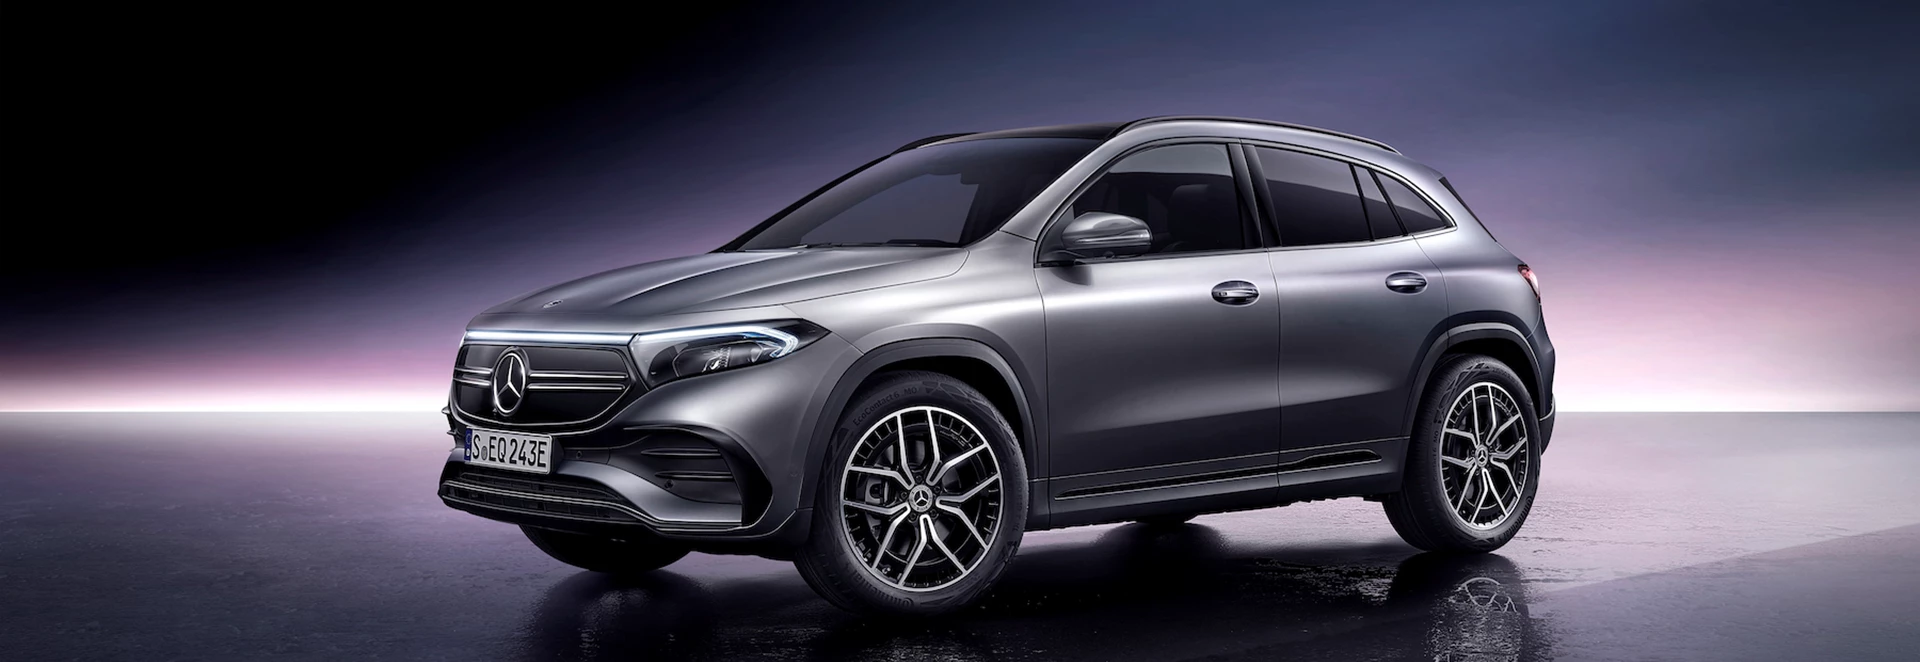 Mercedes EQA revealed as new compact electric SUV 